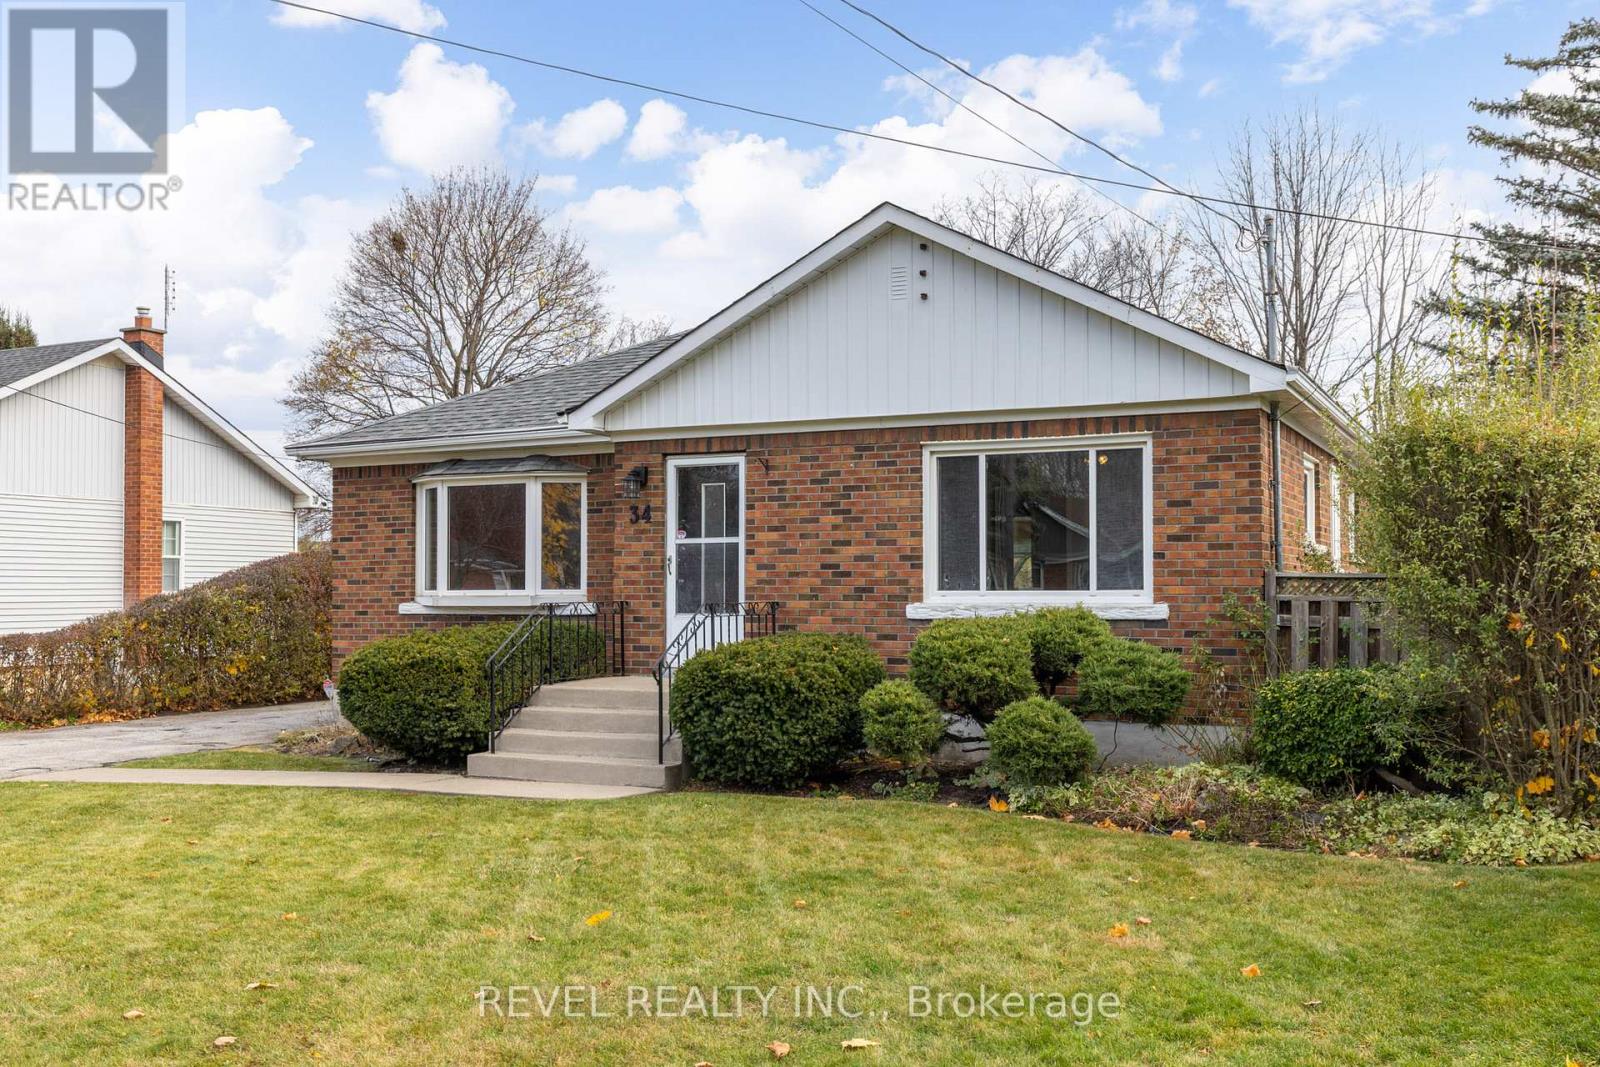 For sale: 34 DUNBLANE AVE, St. Catharines, Ontario L2M3Z7